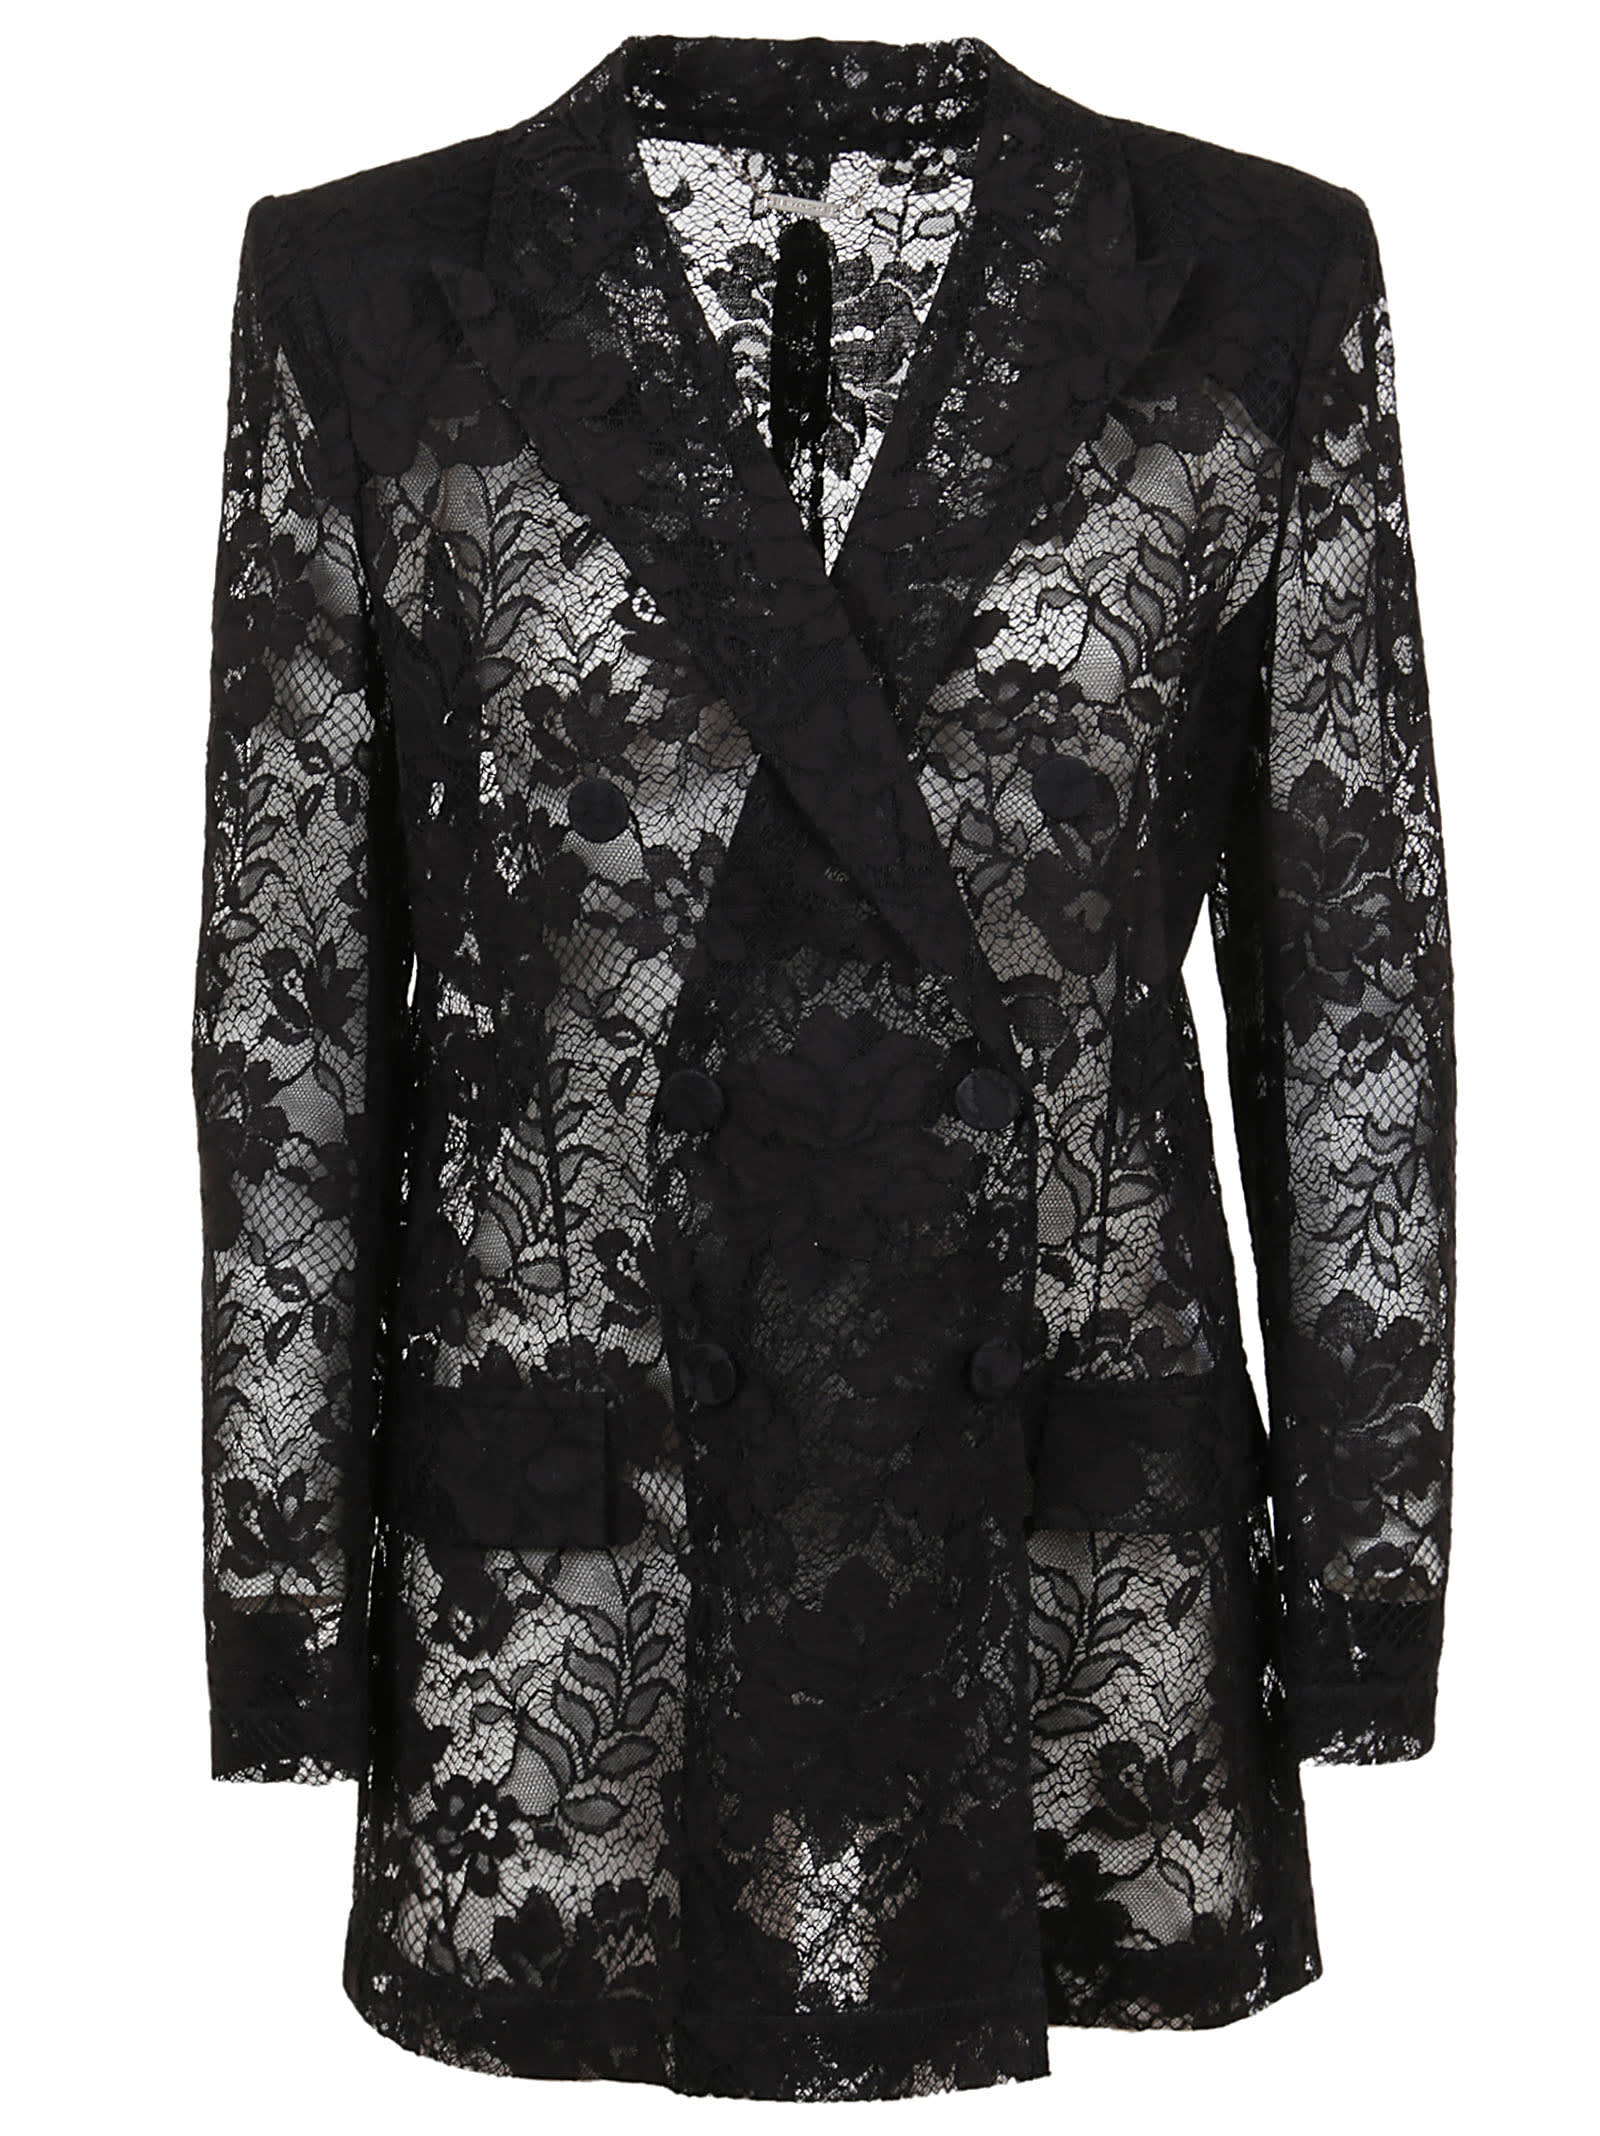 GIVENCHY DOUBLE BREASTED JACKET IN LACE,11245975